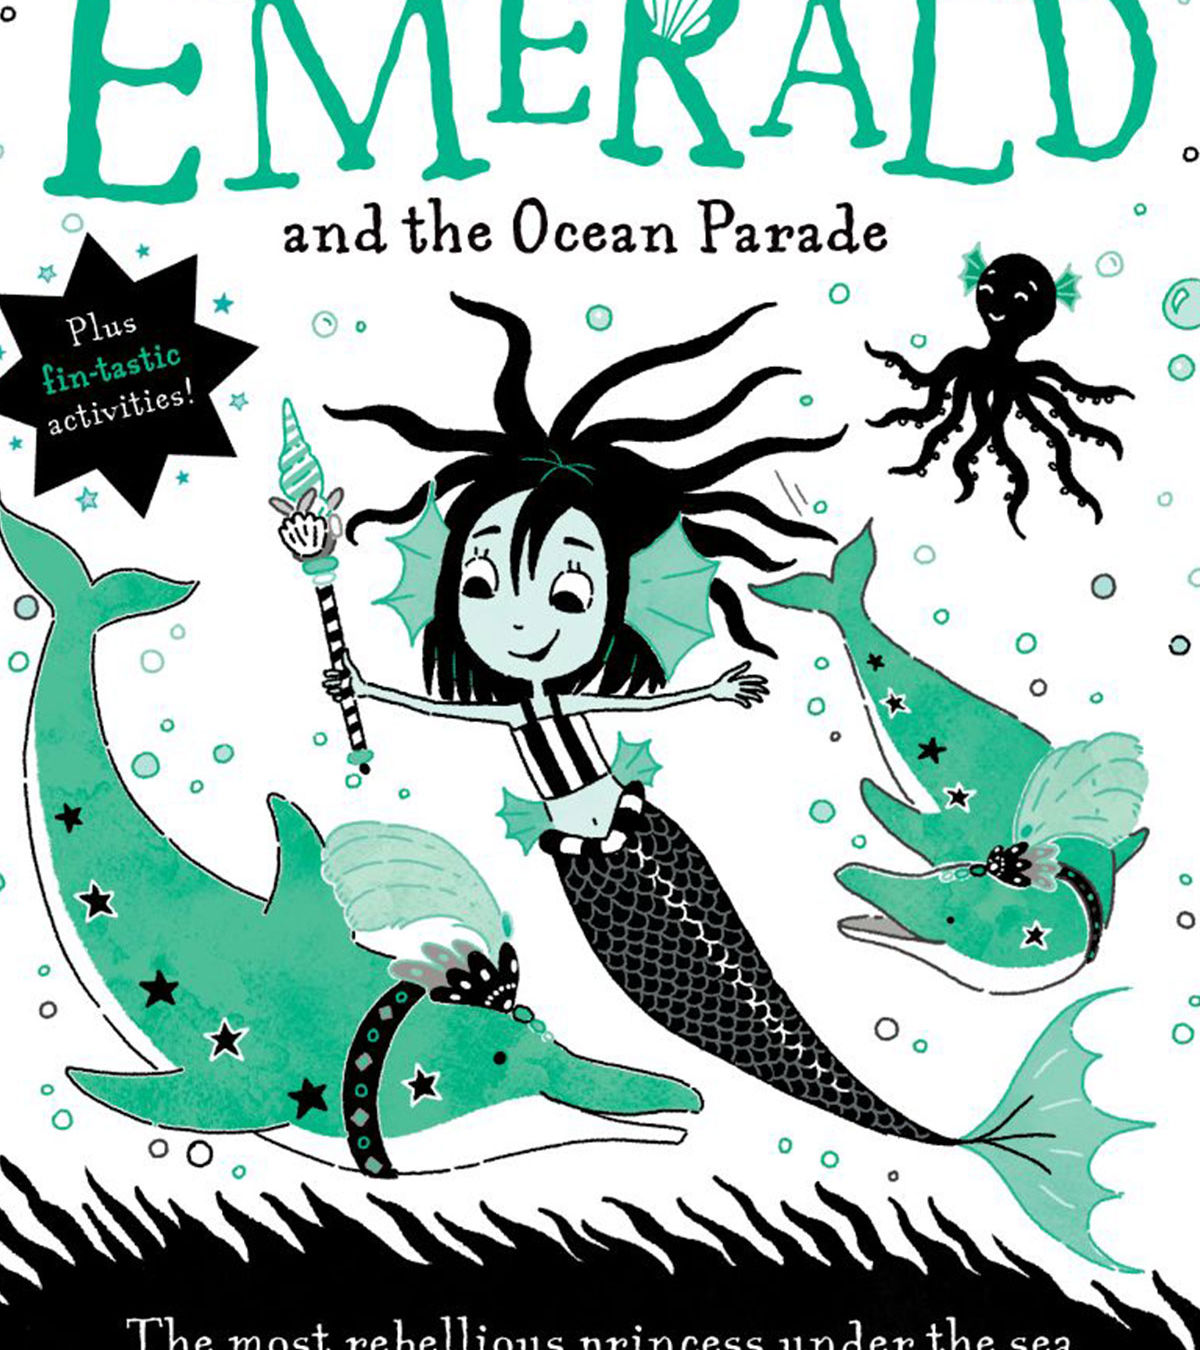 Book jacket for EMERALD AND THE OCEAN PARADE